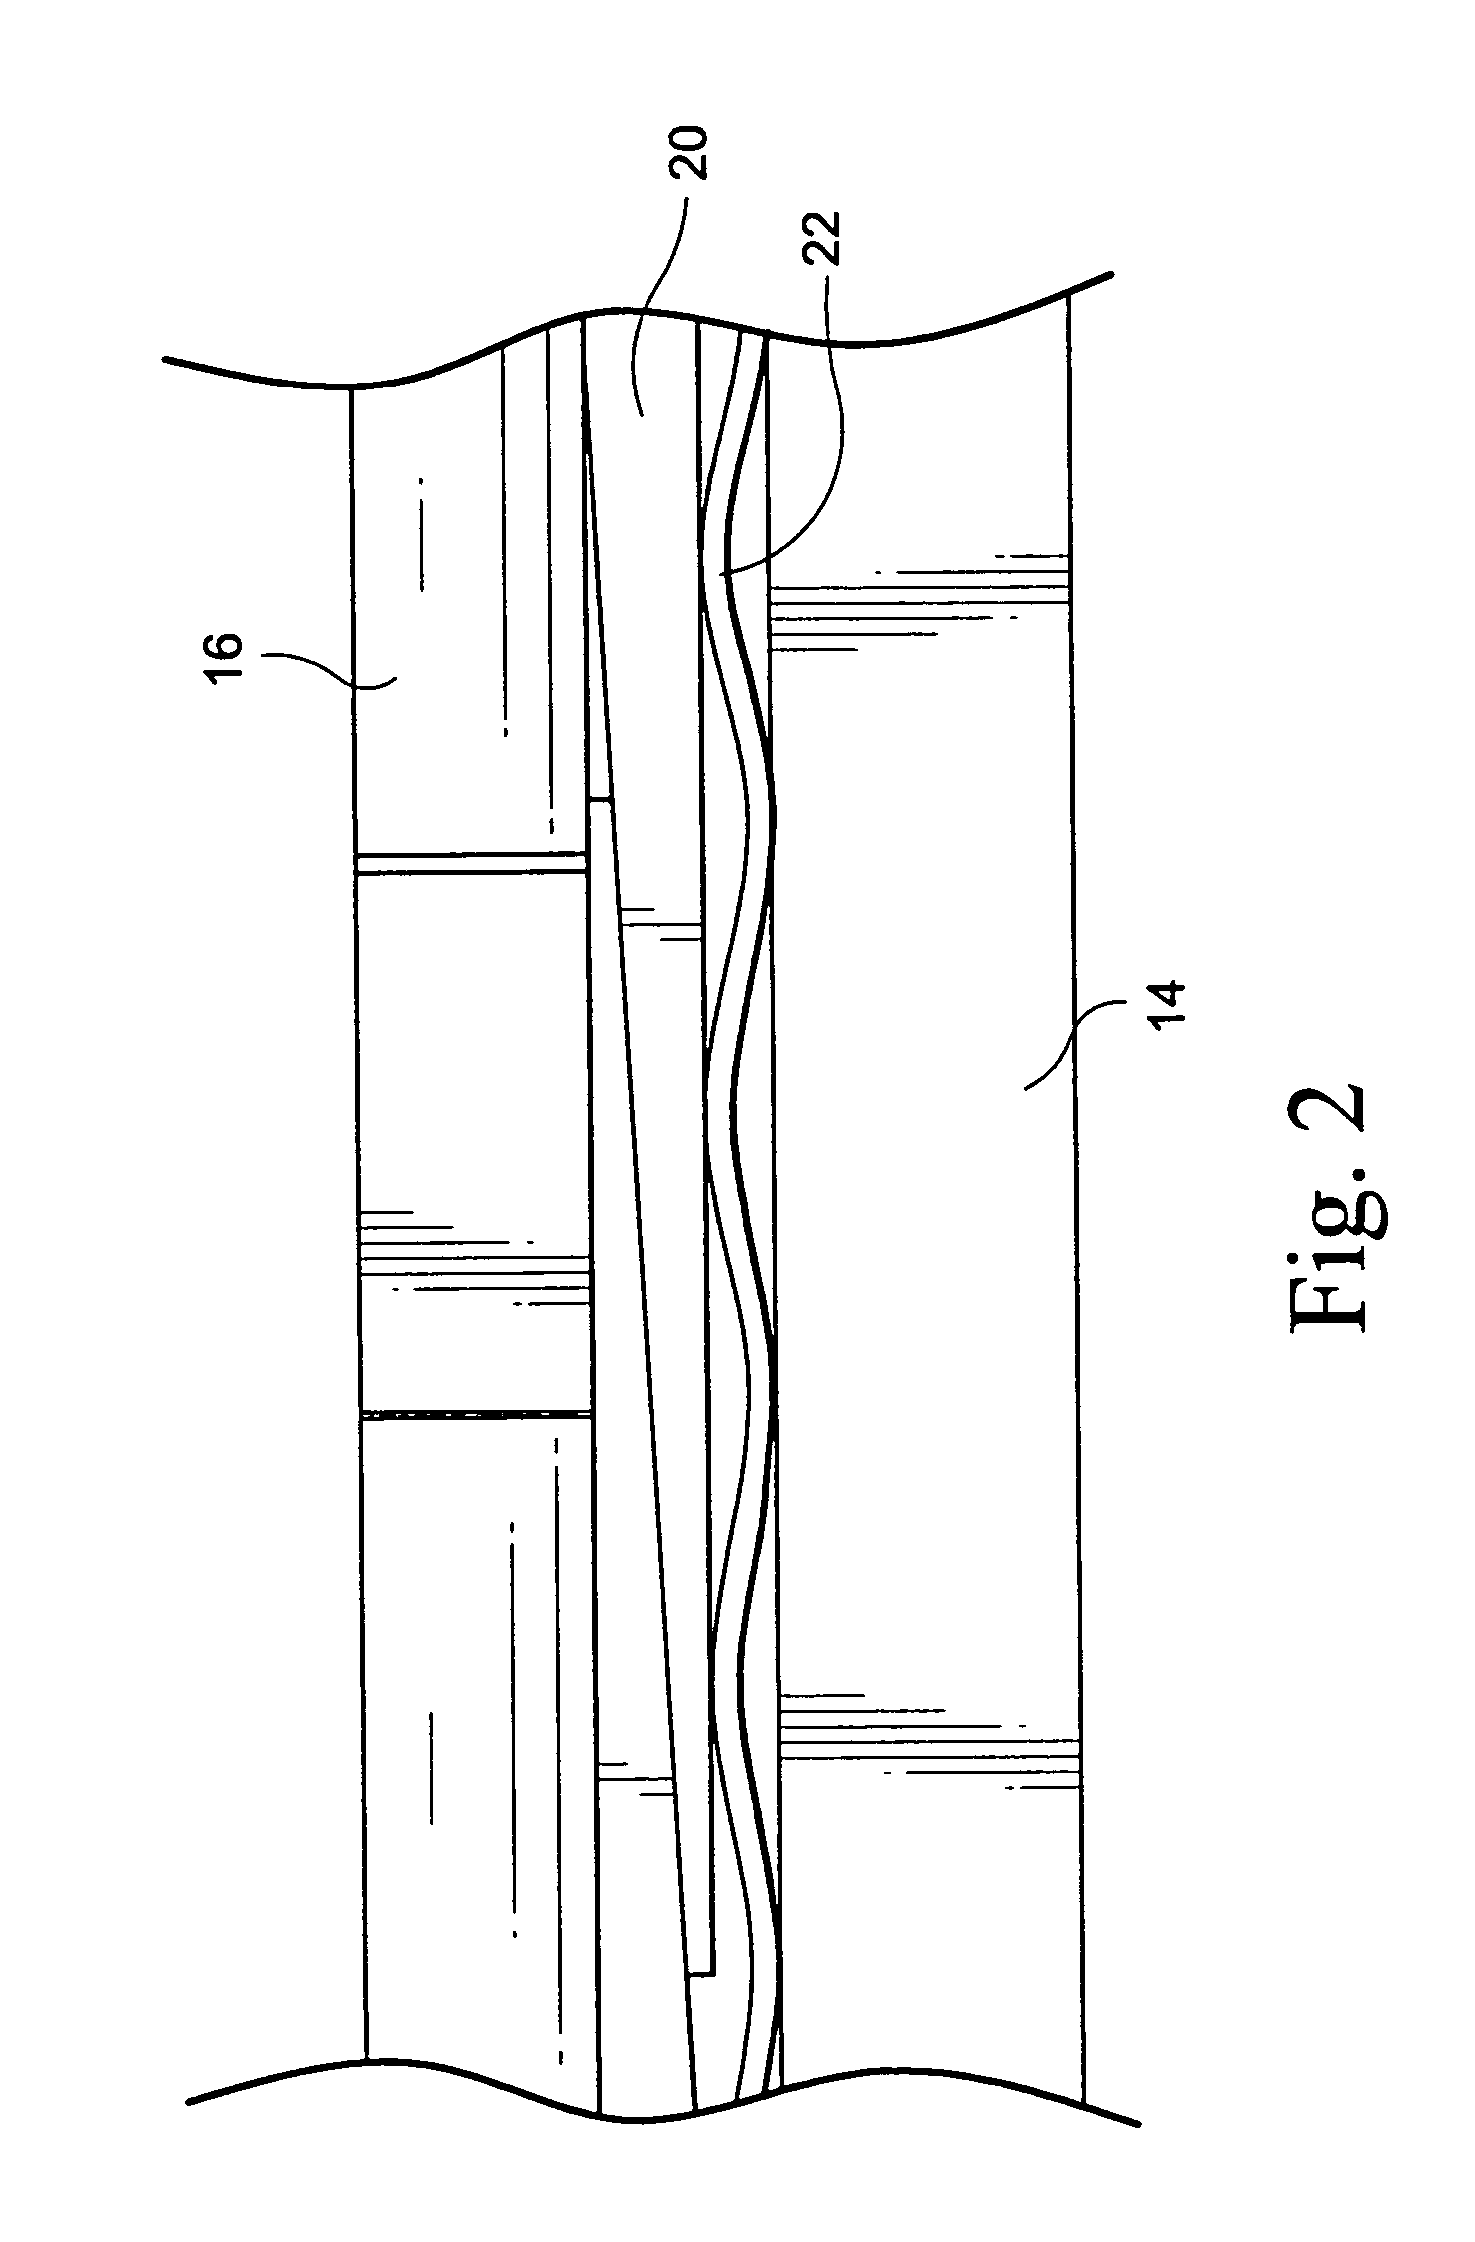 Apparatus and methods for removing wedges of a stator core of an electrical machine